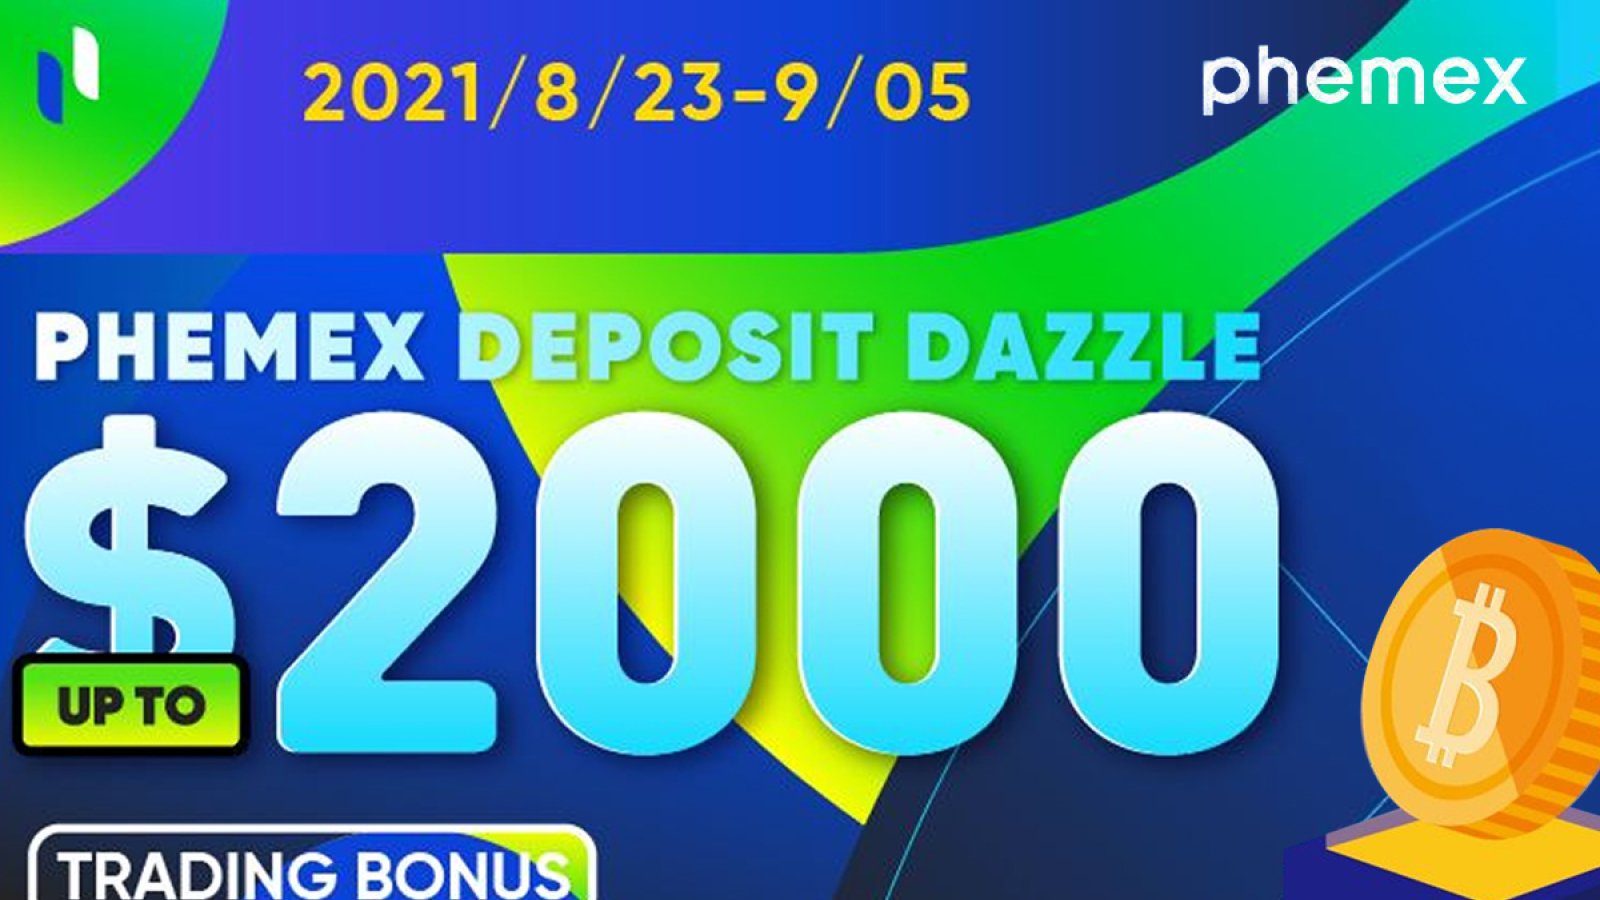 Phemex Deposit Dazzle is Here. What Rewards Can You Win?